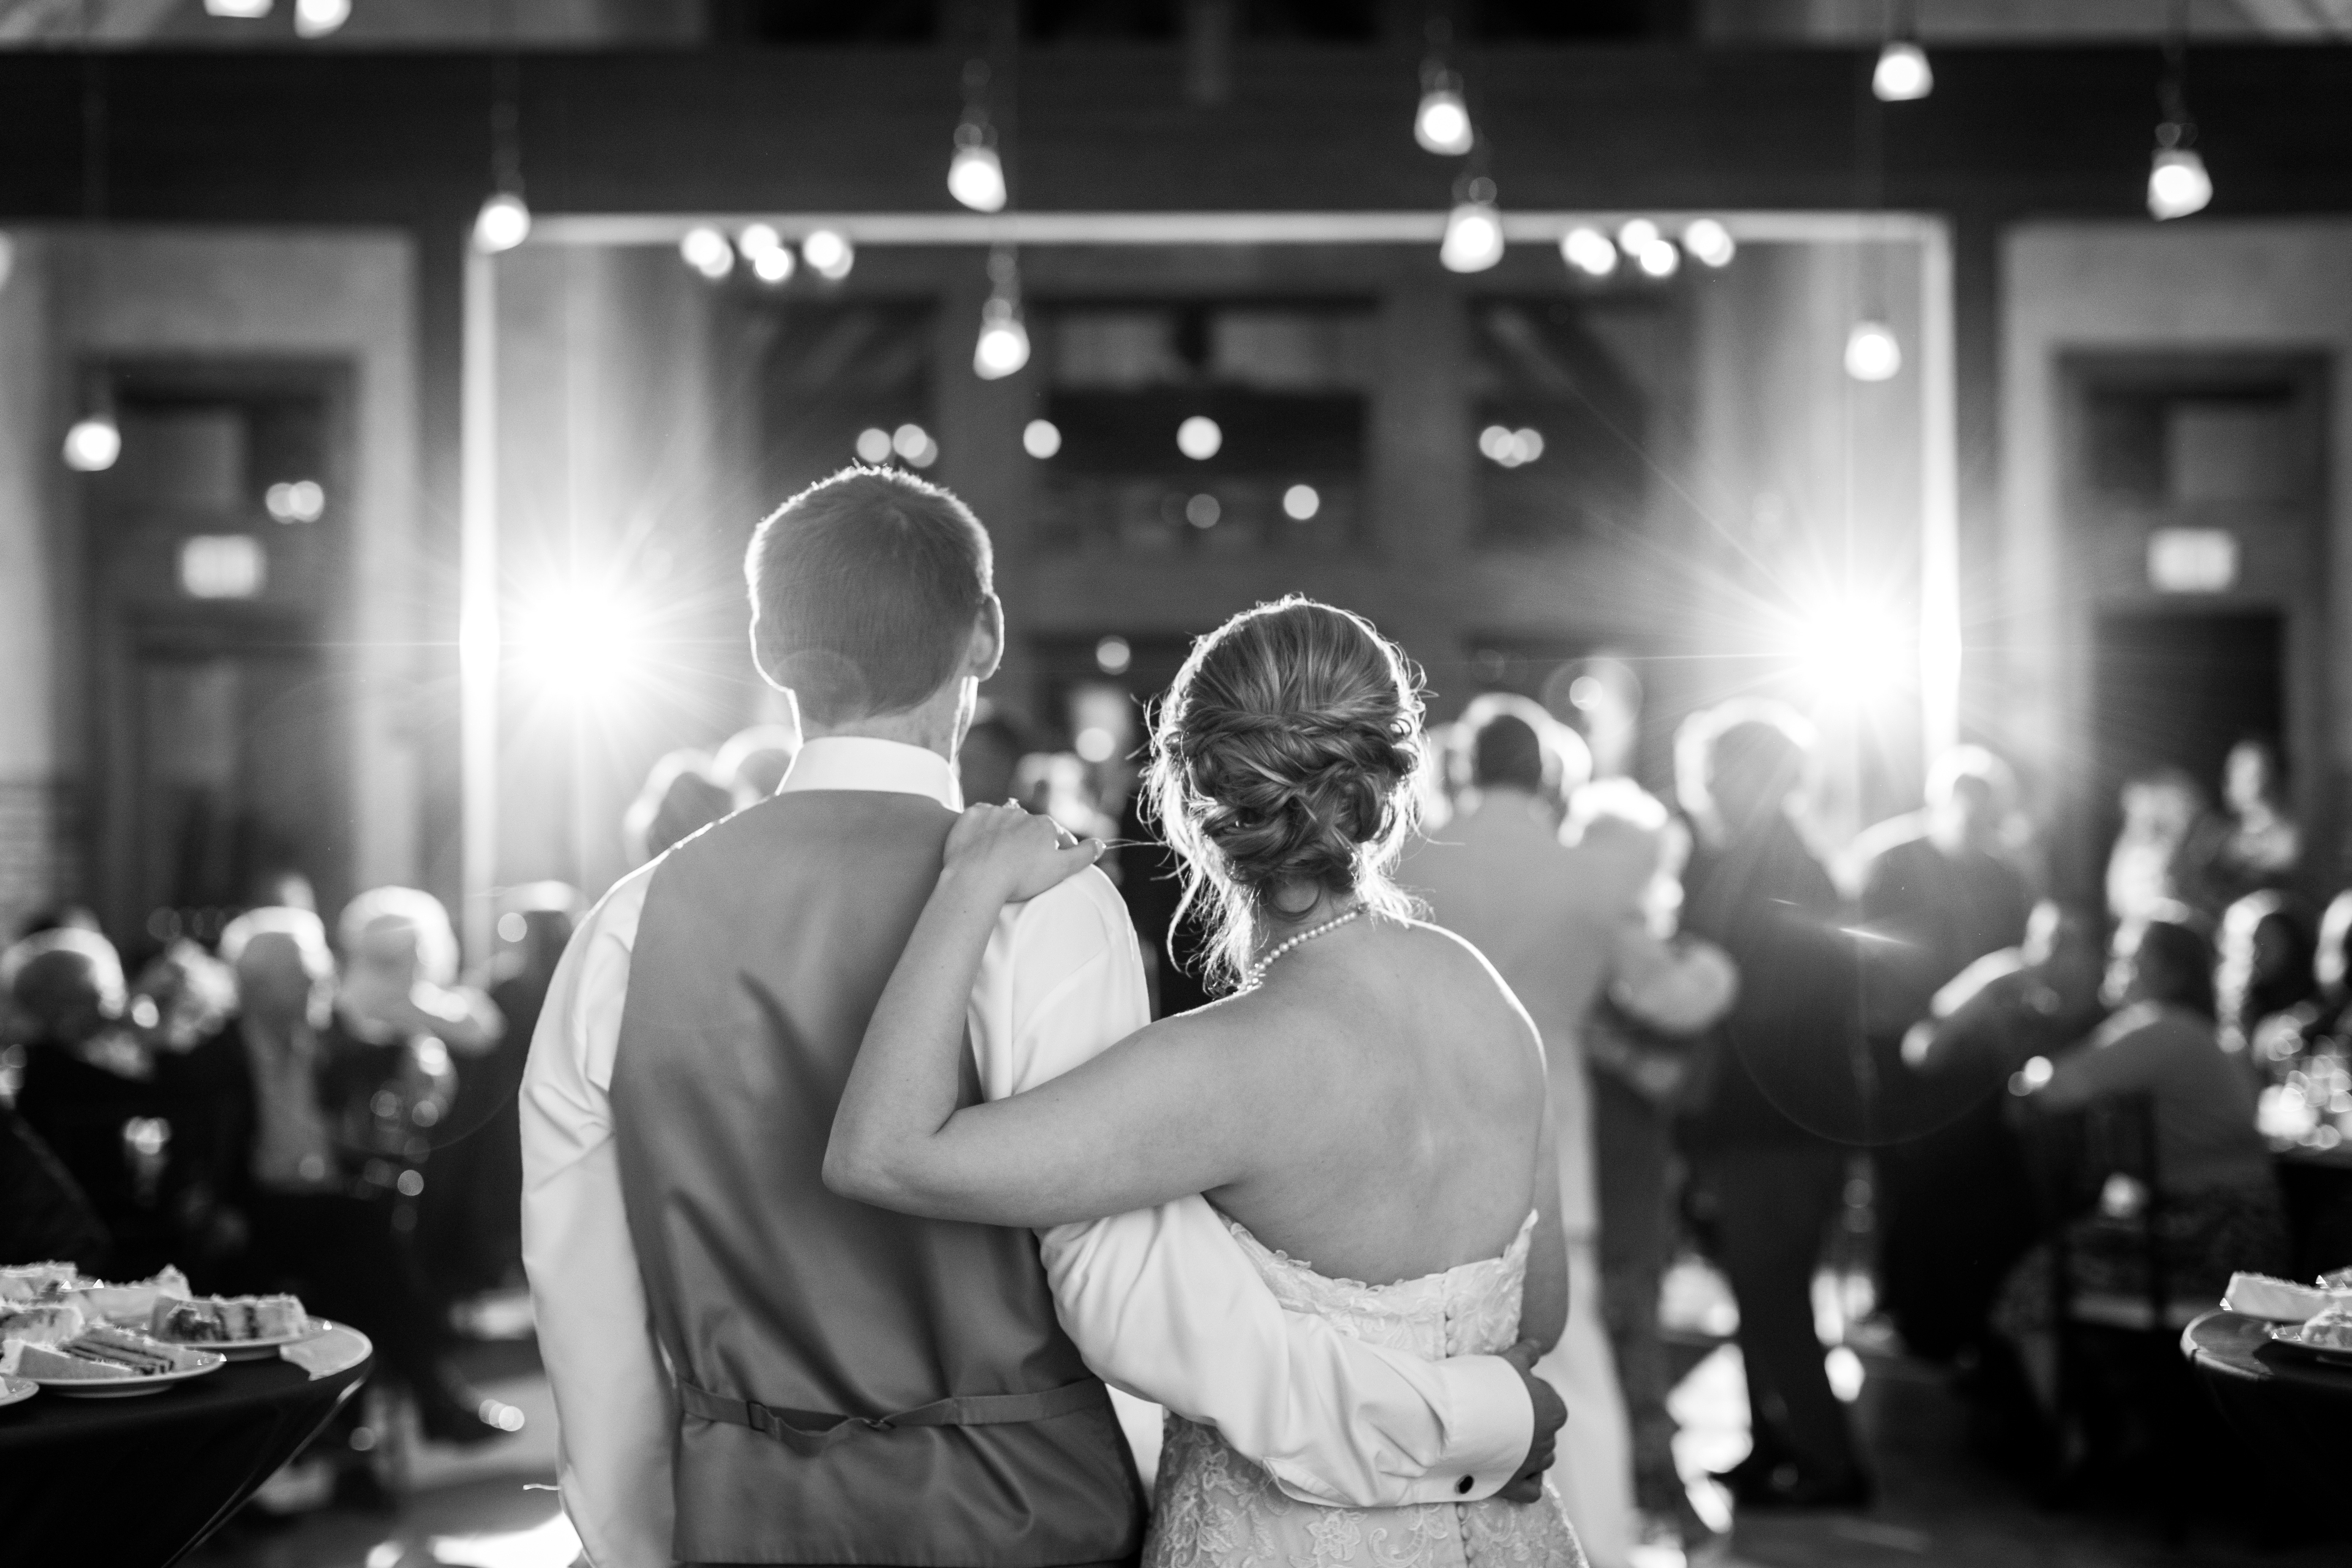 wedding day tips for bride and groom at their reception